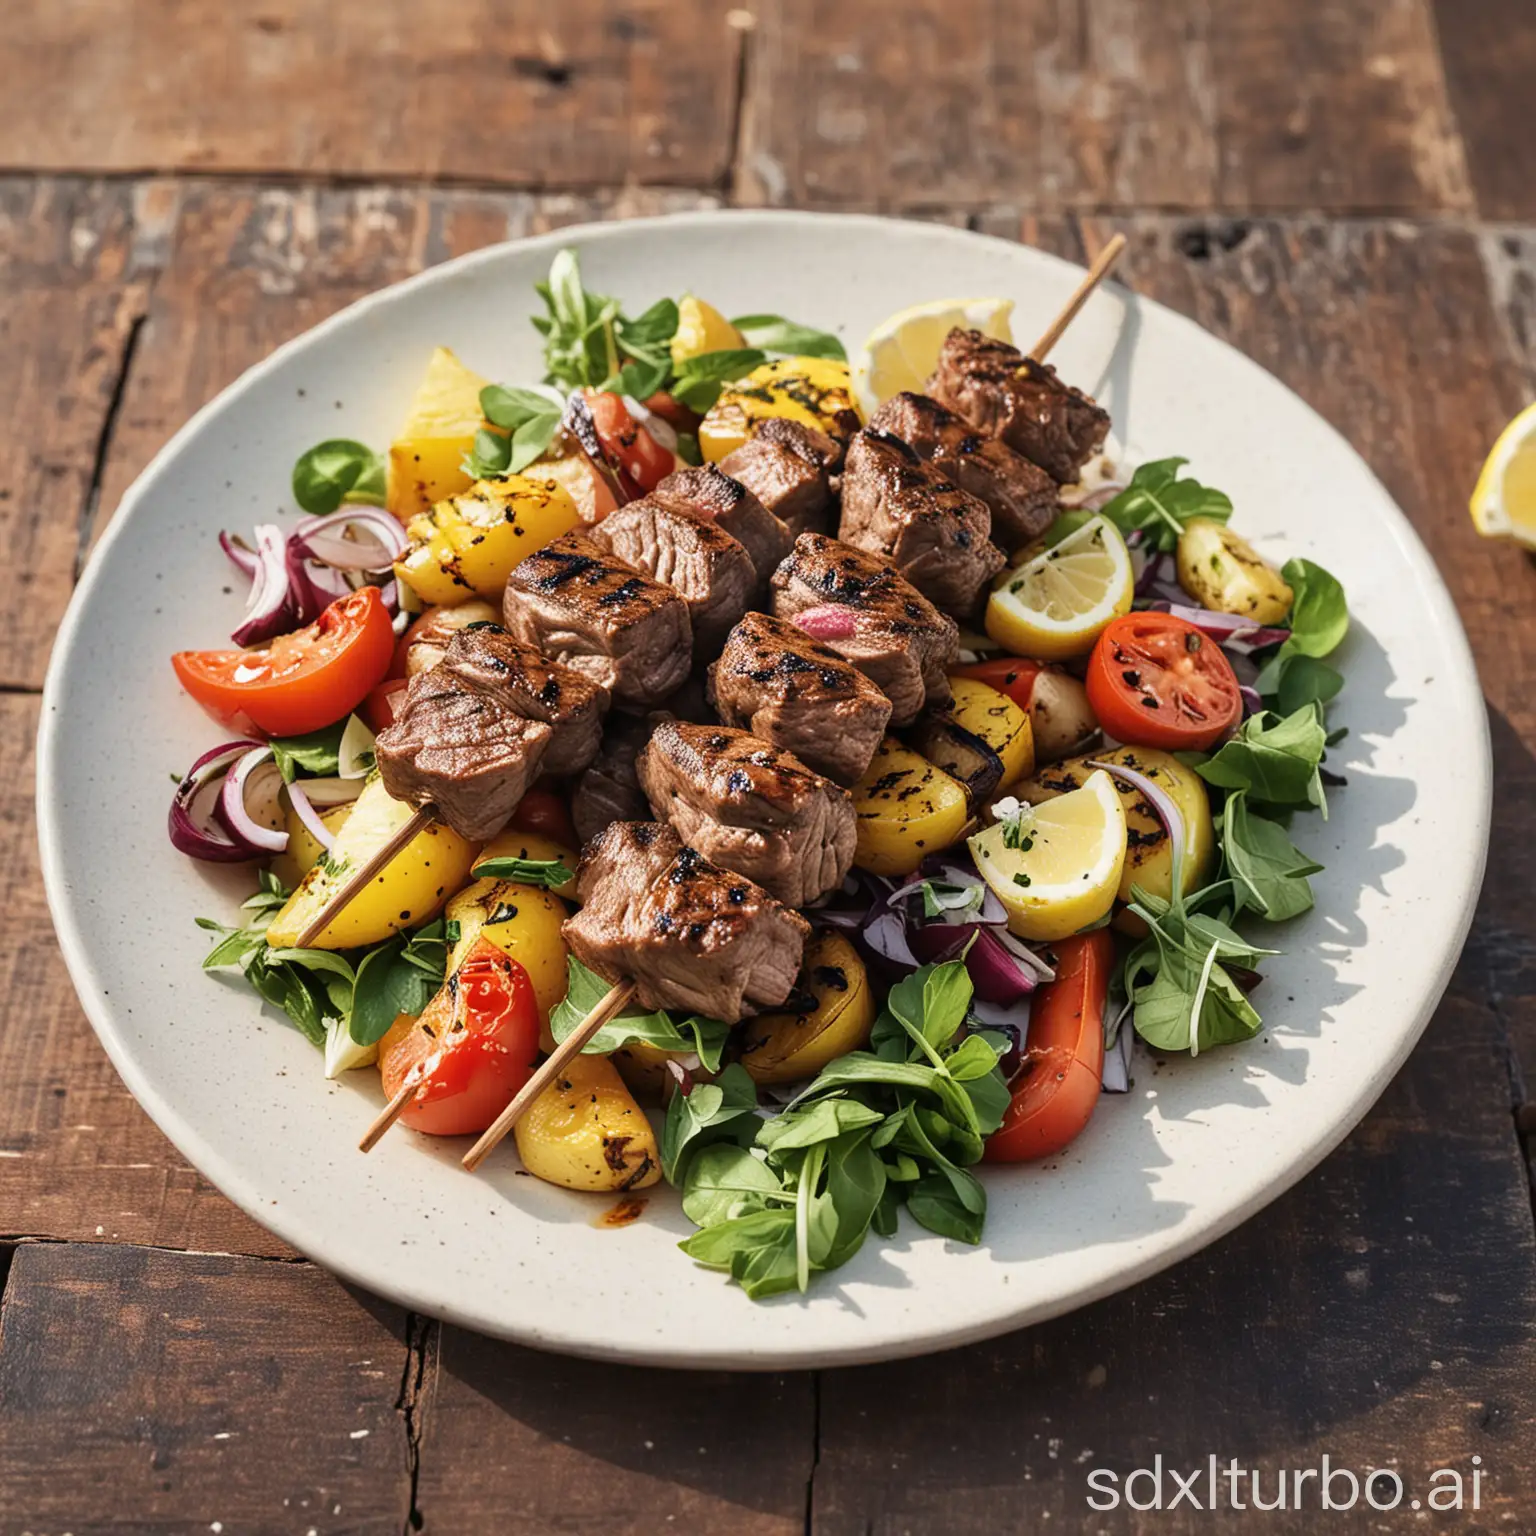 A photograph of an enticing Mediterranean grilled lamb skewer, served with fresh vegetables, lemon, and herbs. Set in an outdoor dining setting, illuminated by natural light.